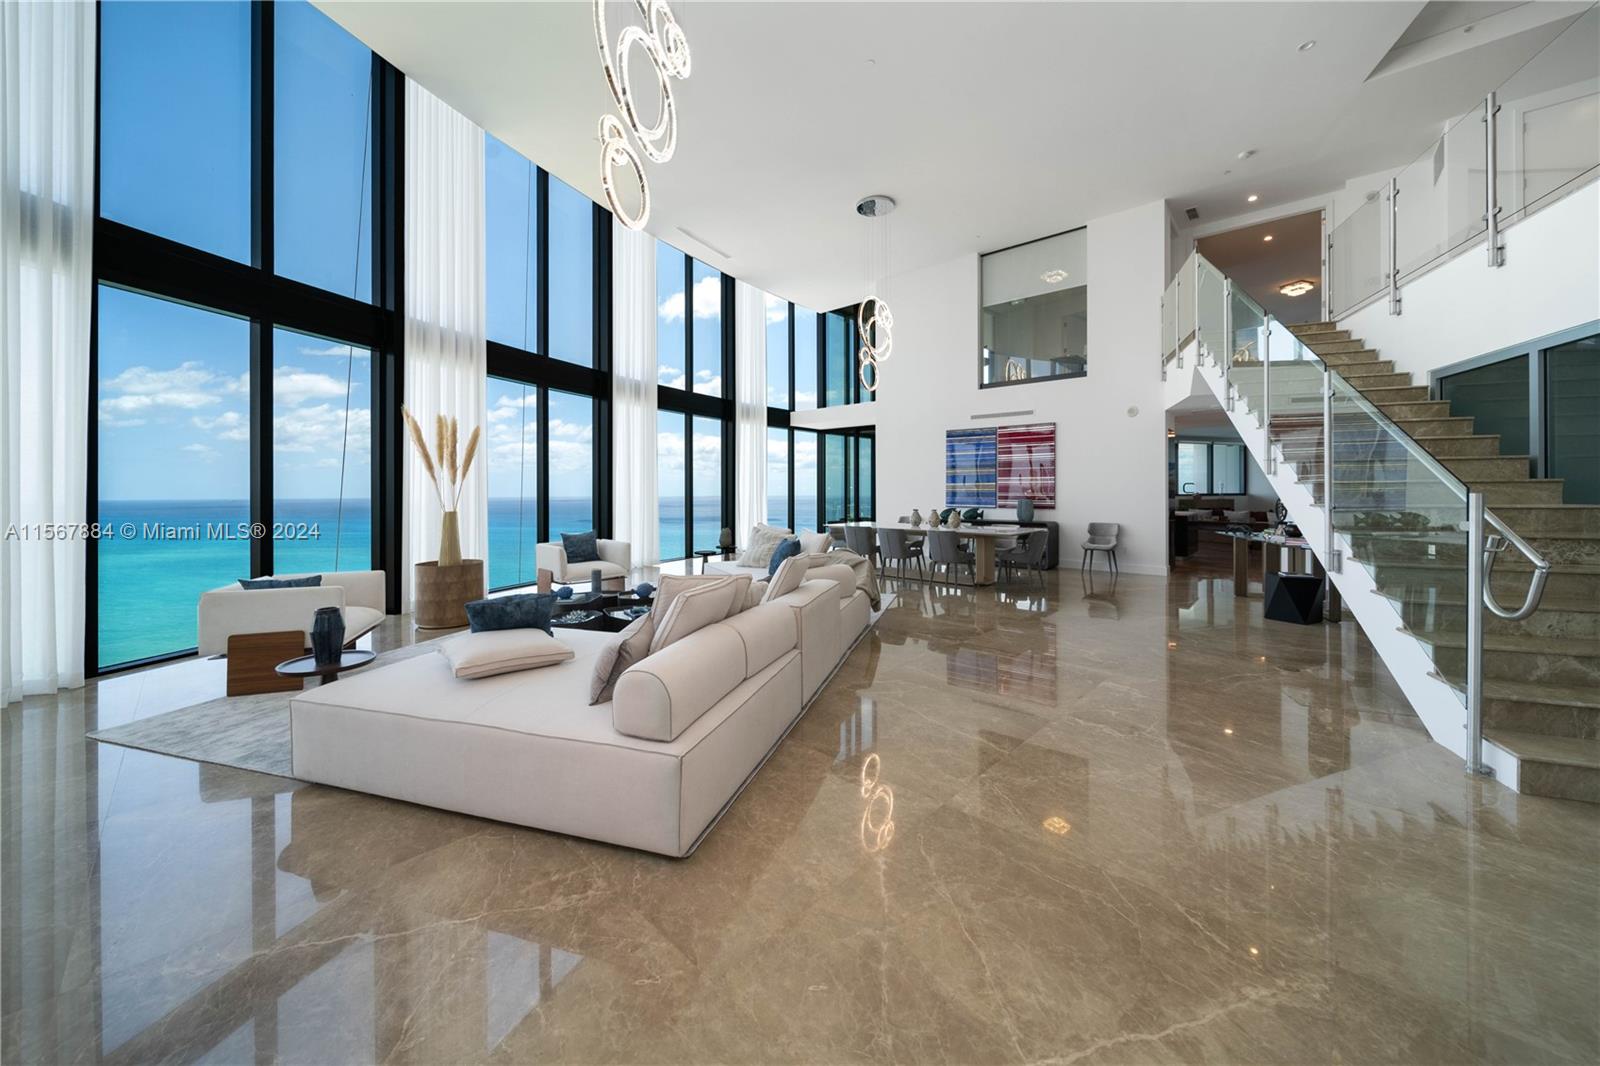 Last Spectacular Duplex PH unit available with best view in the building.  Two story residence in Porsche Design Tower with 4 car garage, internal elevator, private pool, 2 balconies, 2huge master bedrooms, sleek designer kitchen, Emperador Spanish Marble 48/48, unobstructed ocean and intracoastal views, private beach with sunset, pool yoga center, state of the art gym, with simulator technology (VRX motion Z -55 racing), movie theater restaurant and more! Monthly maintenance to be checked by buyer realtor